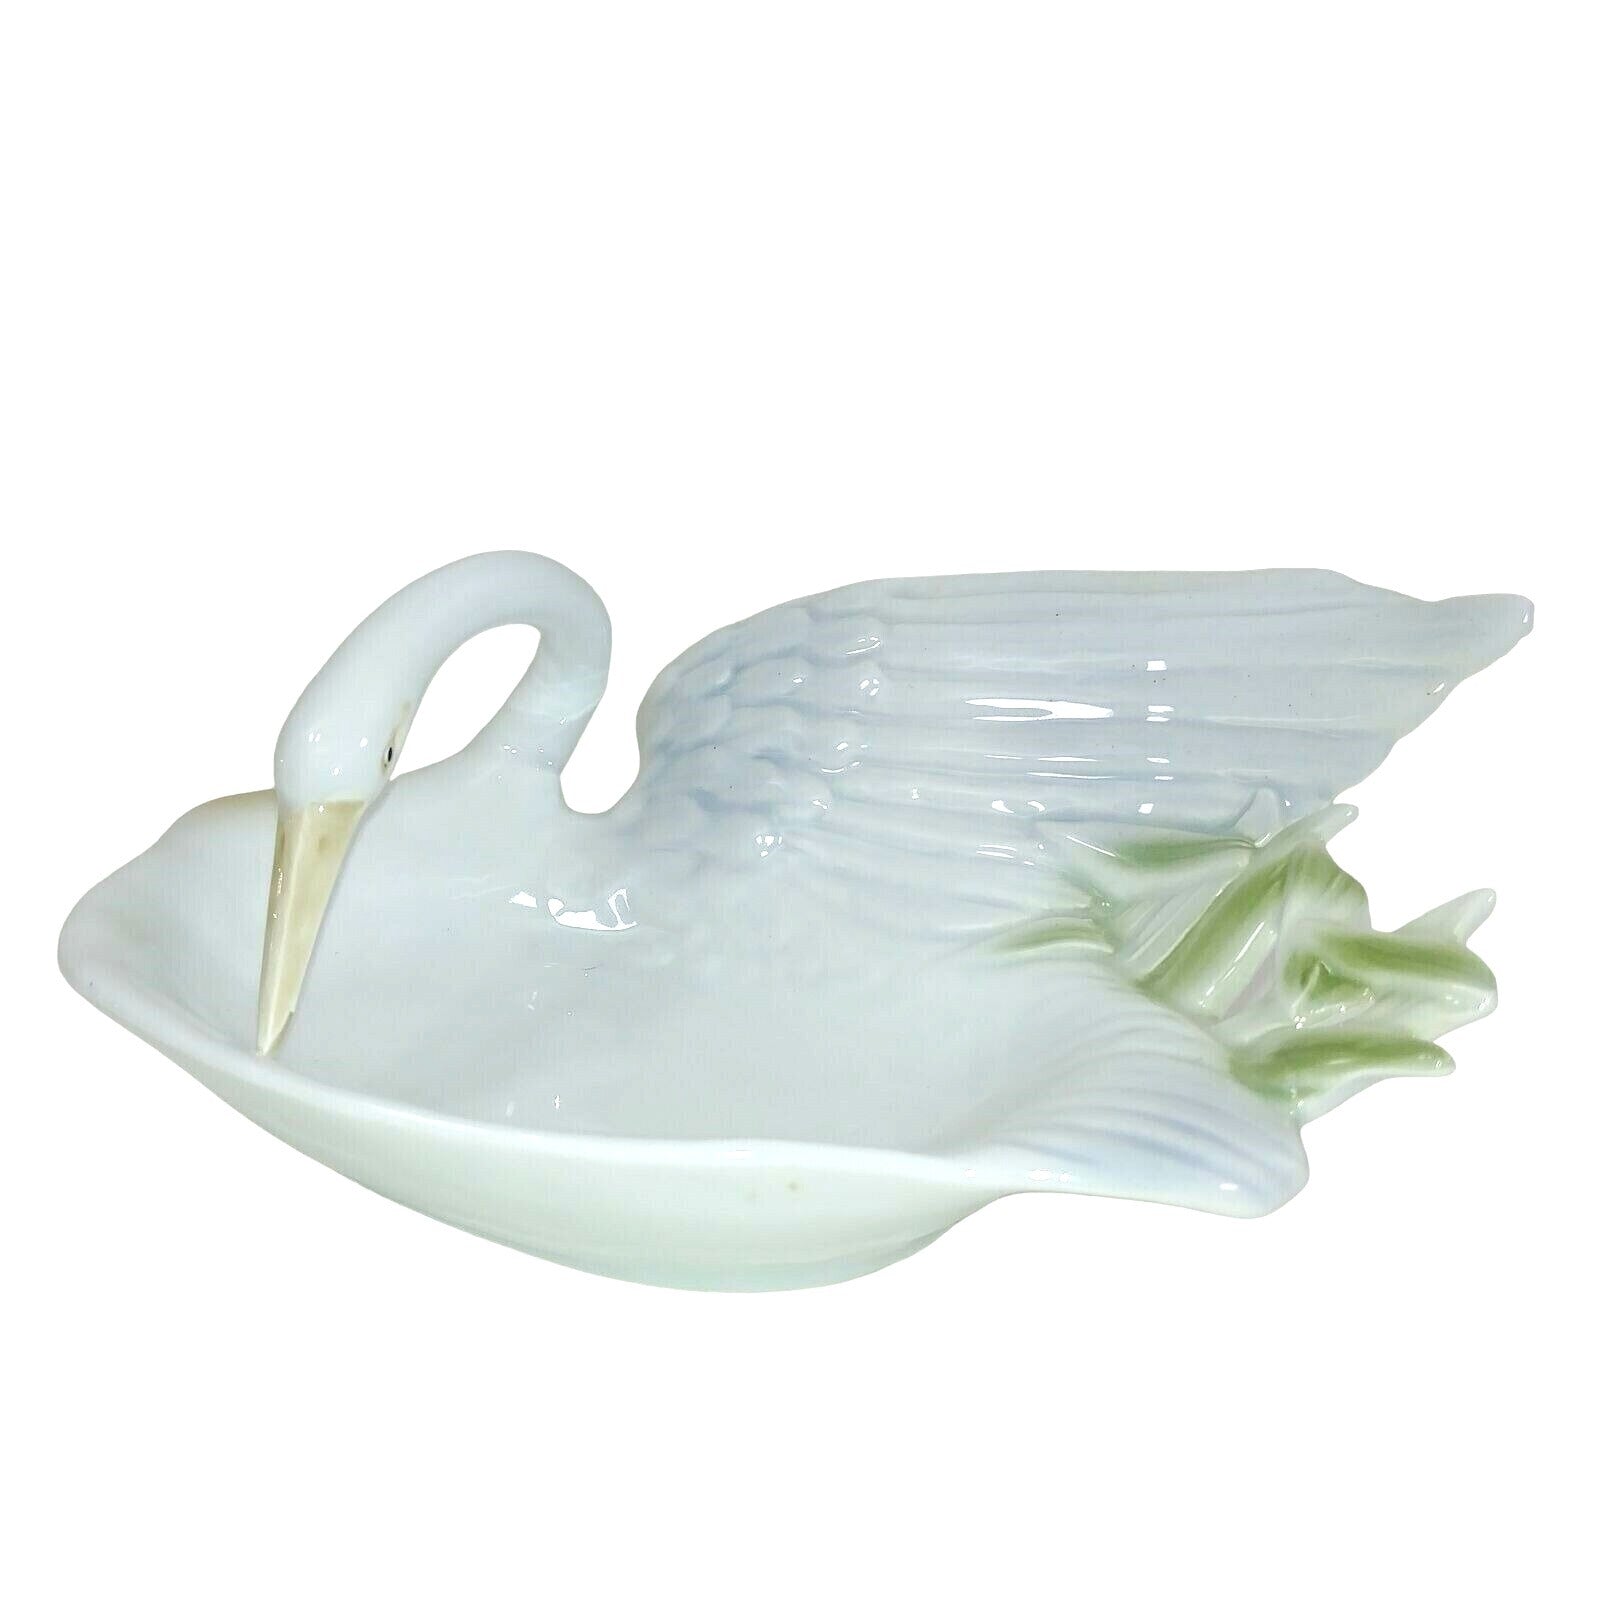 FF Fitz and Floyd Swan Soap or Candy Dish Original Decal